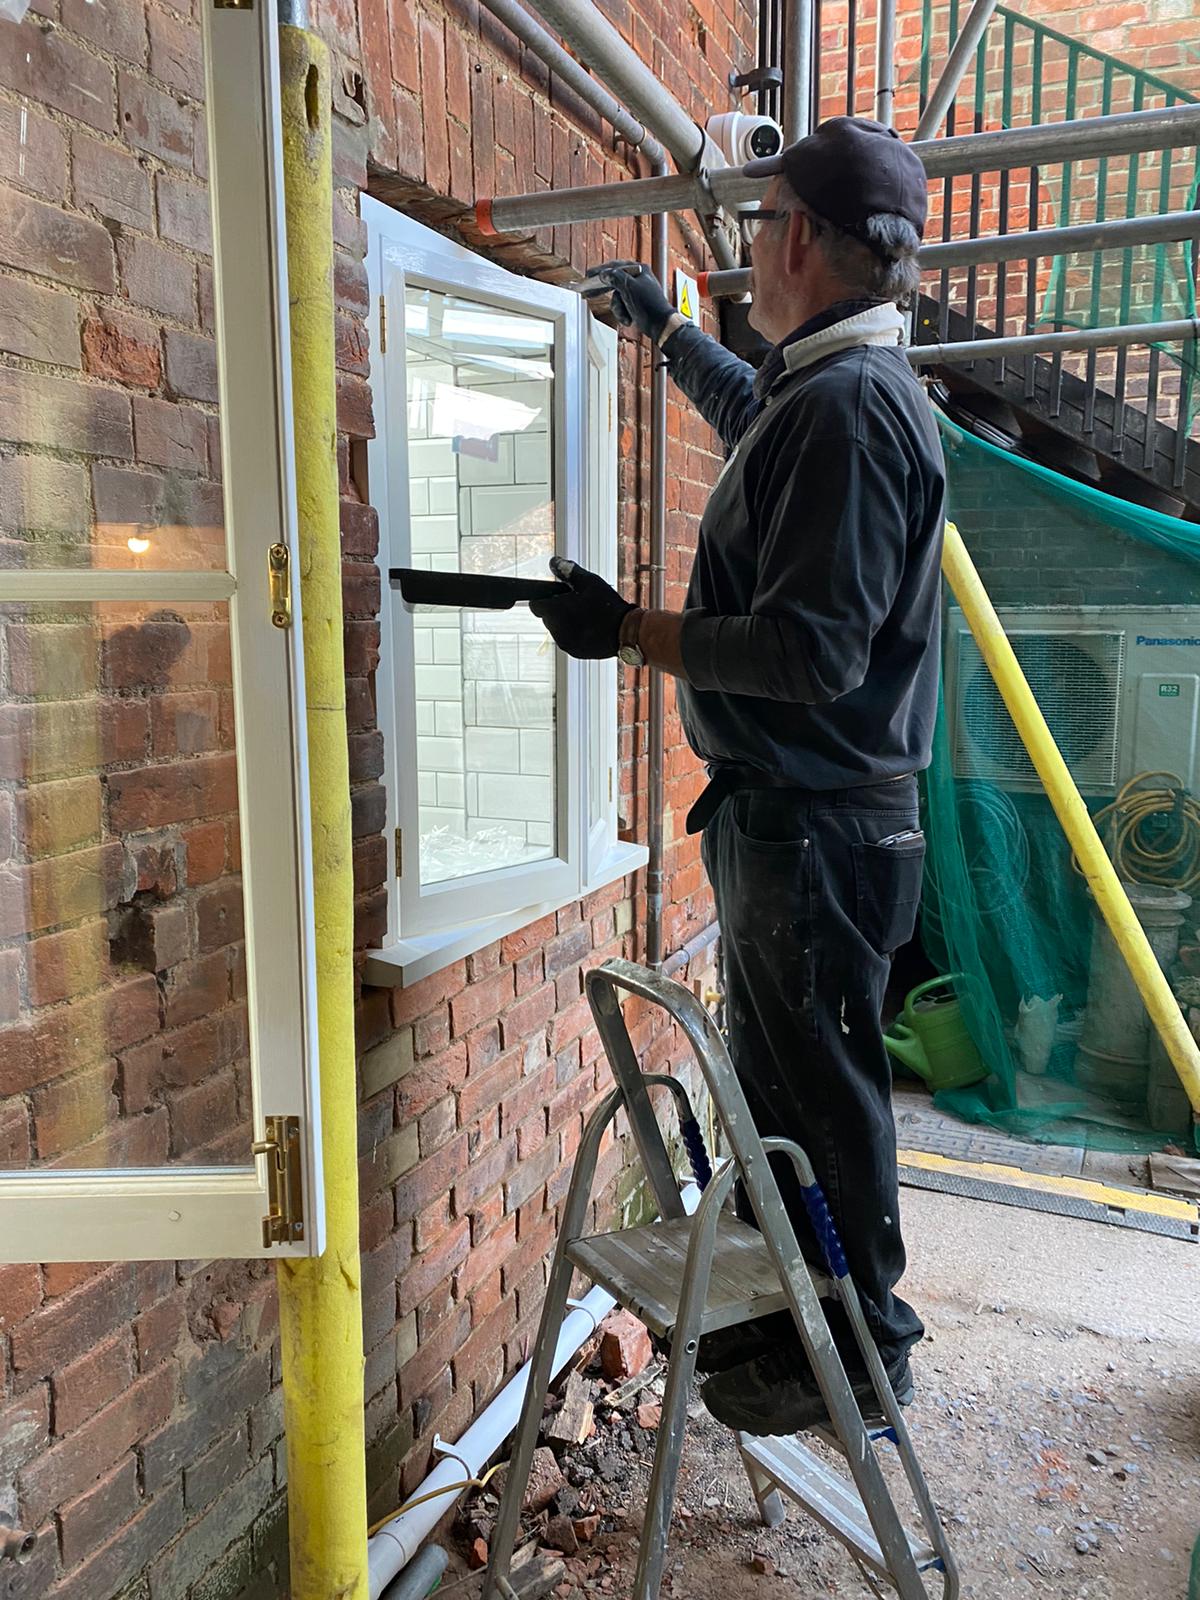 Another shot of John painting the new window fitted last week